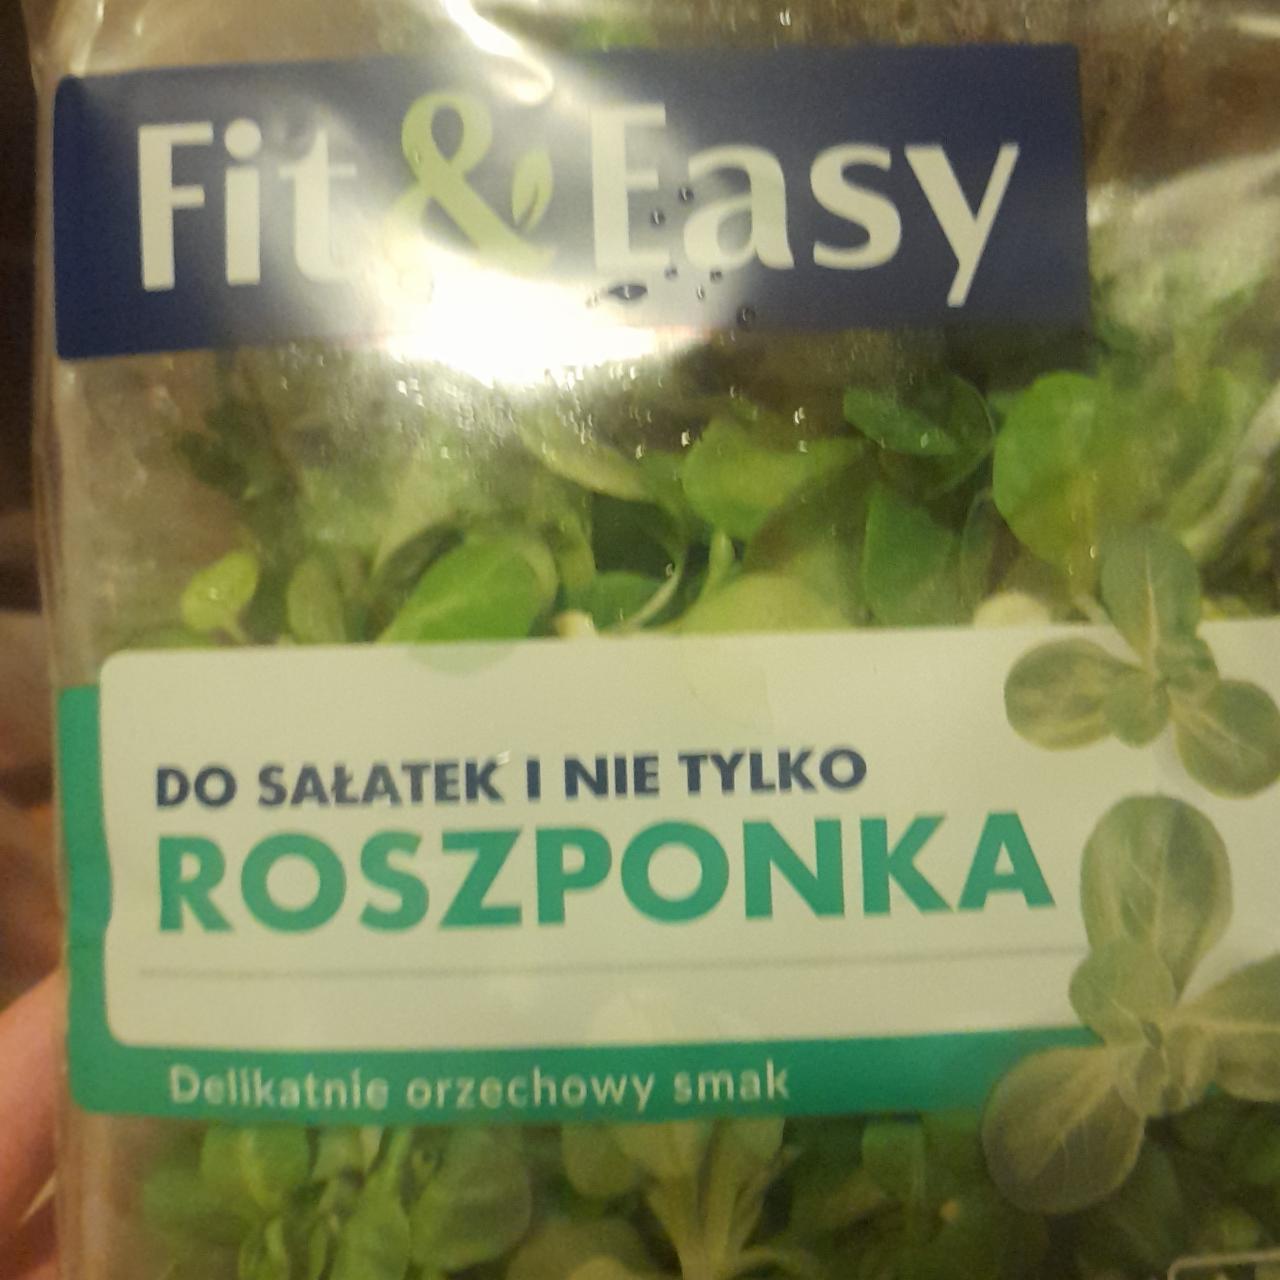 Фото - Roszponka Fit and Easy